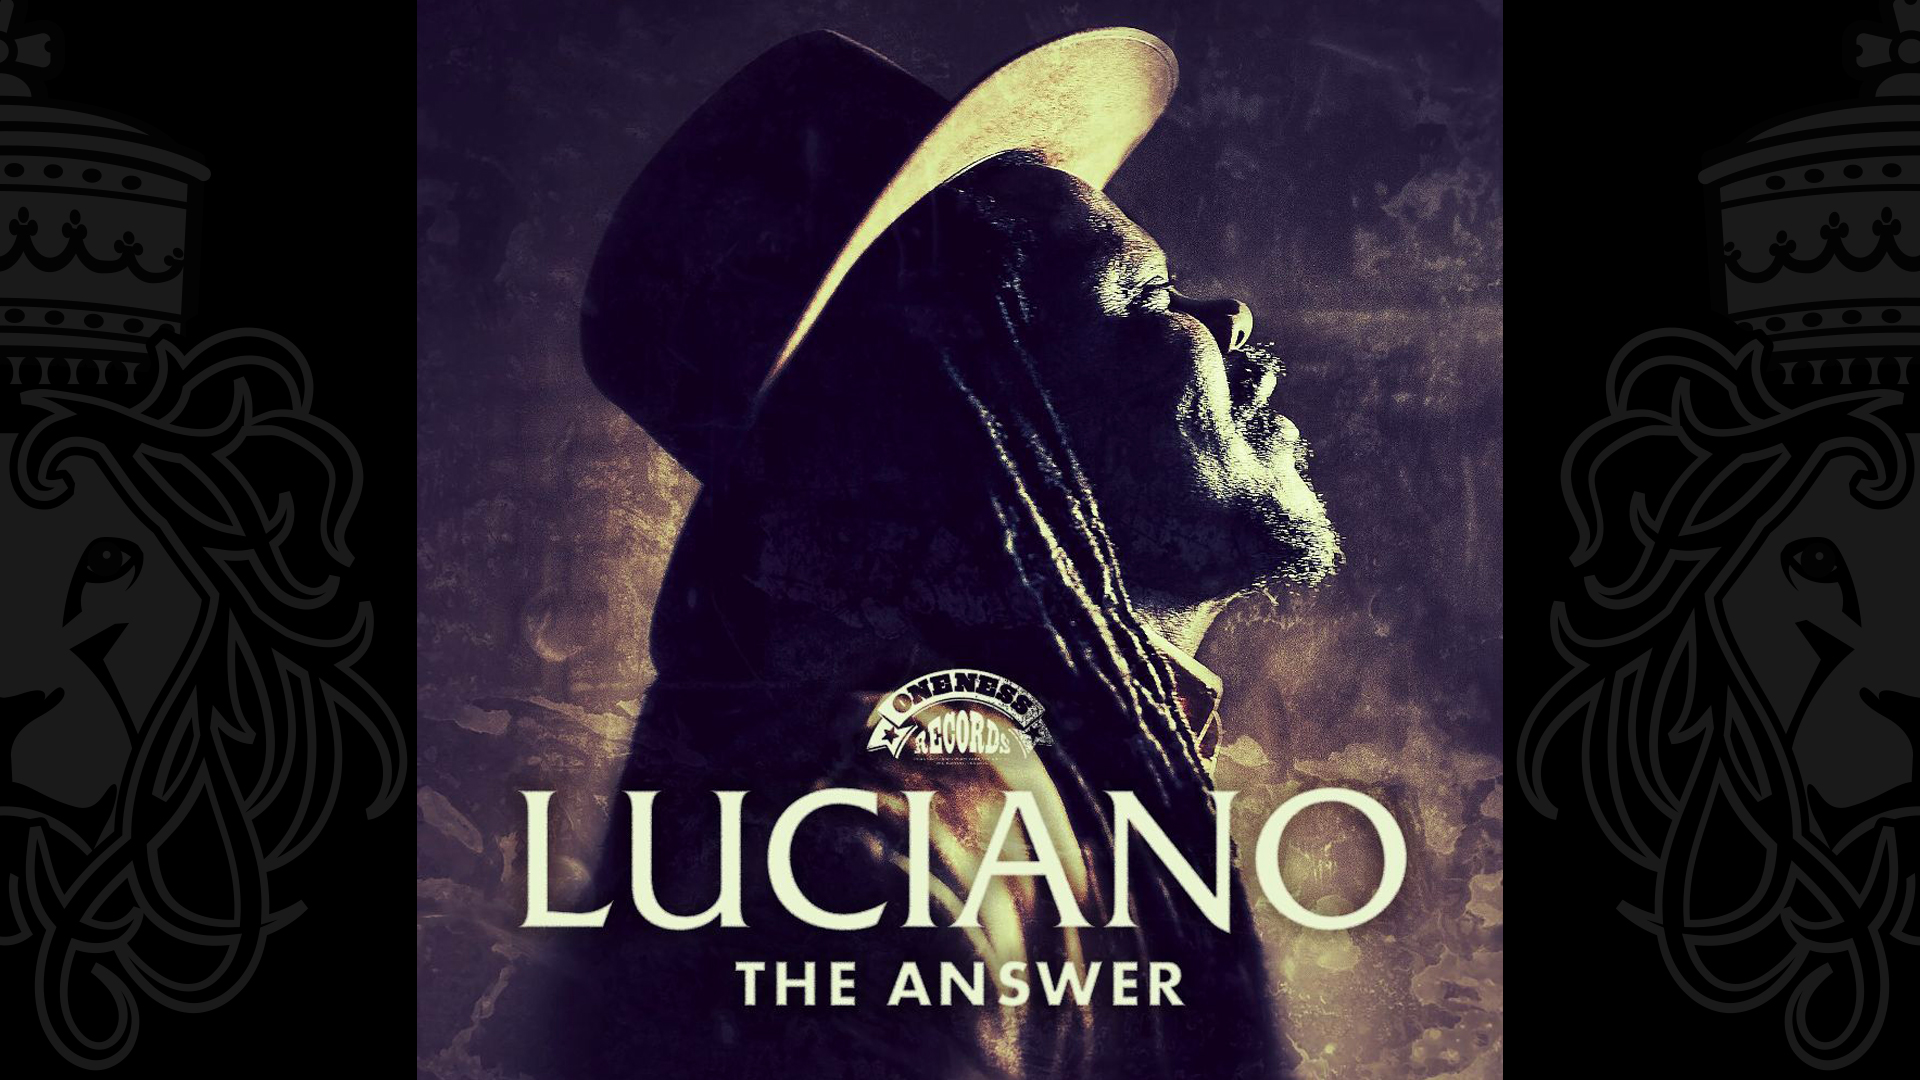 Luciano Releases long-awaited "The Answer" Album